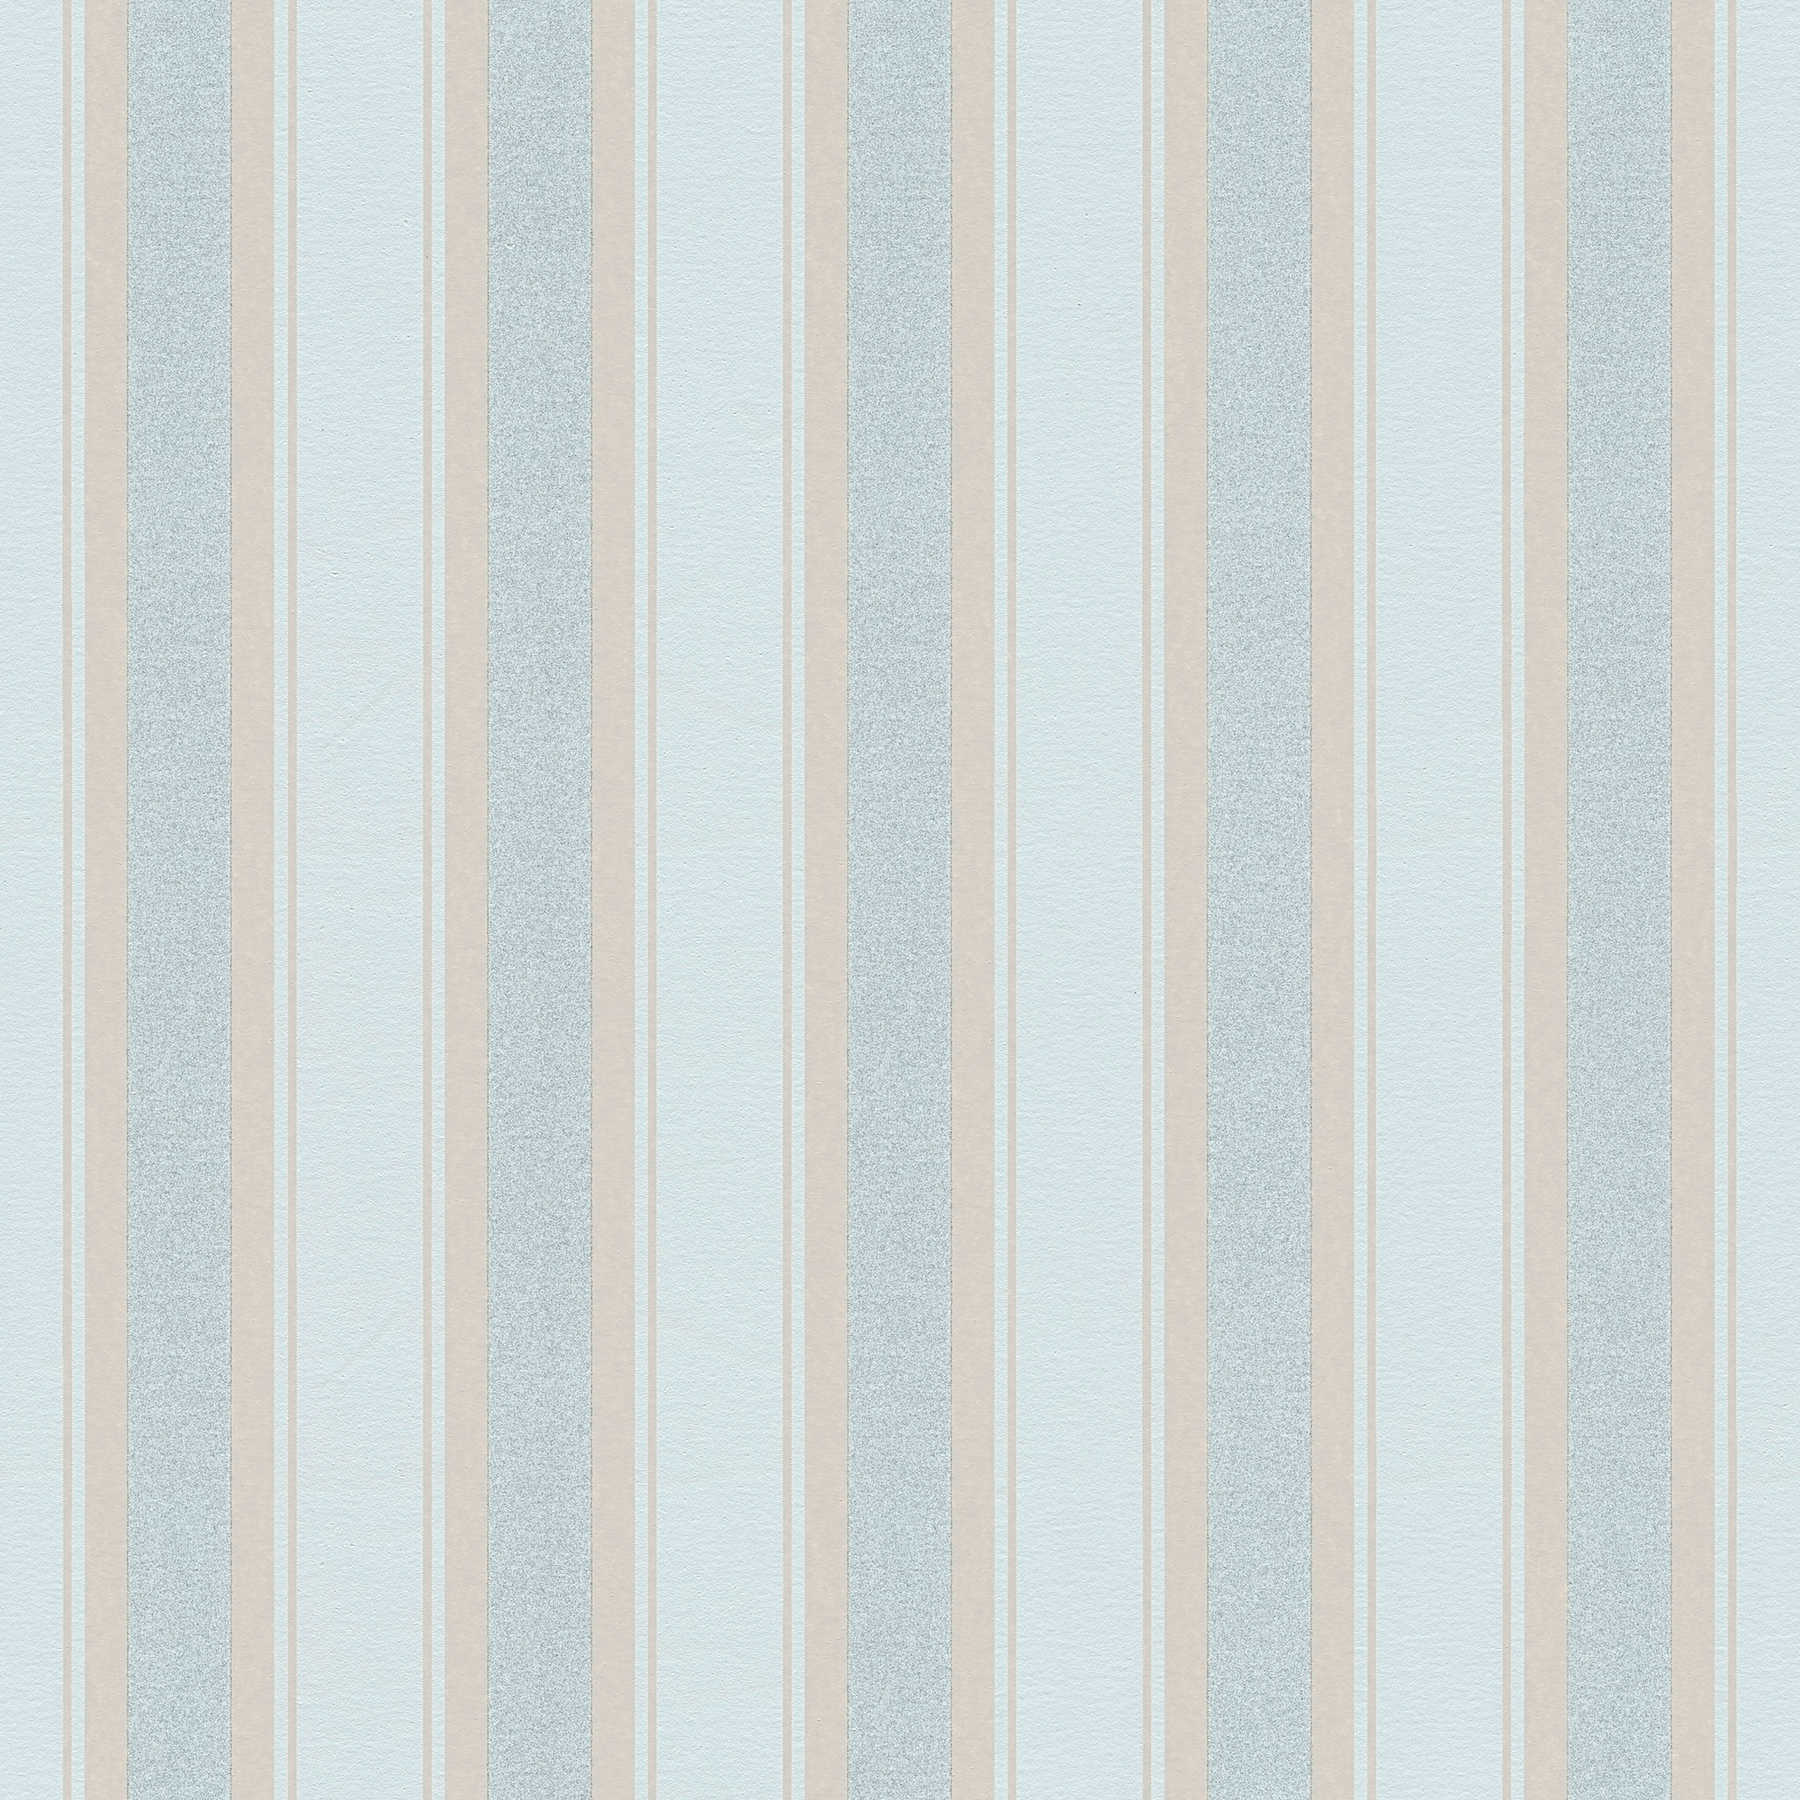 Striped wallpaper with glitter effect - blue, brown
